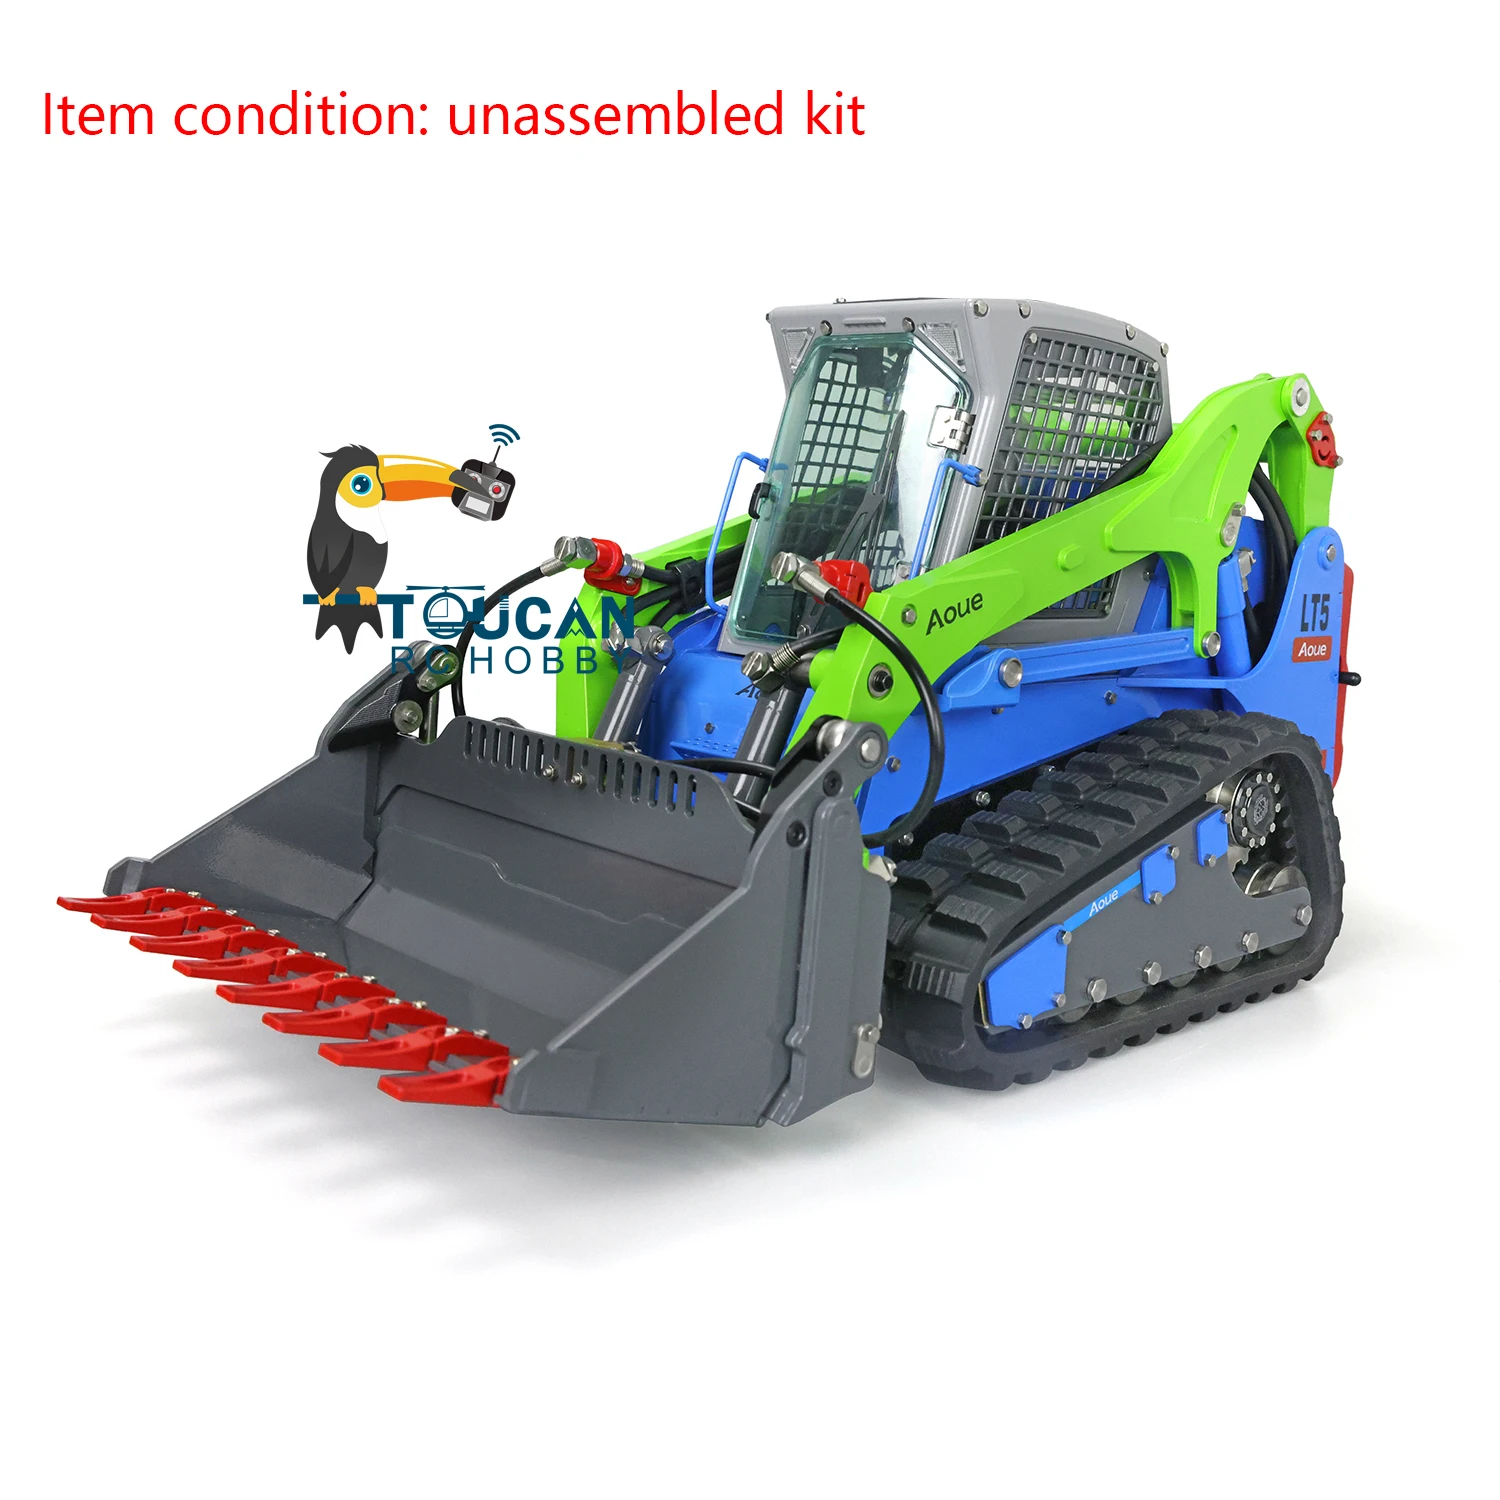 

LESU Assembled RC Loader 1/14 Metal Aoue Lt5 RC Hydraulic Tracked Skid-Steer Lights Sound ESC Motor Boy Toy Thzh1274-Smt3